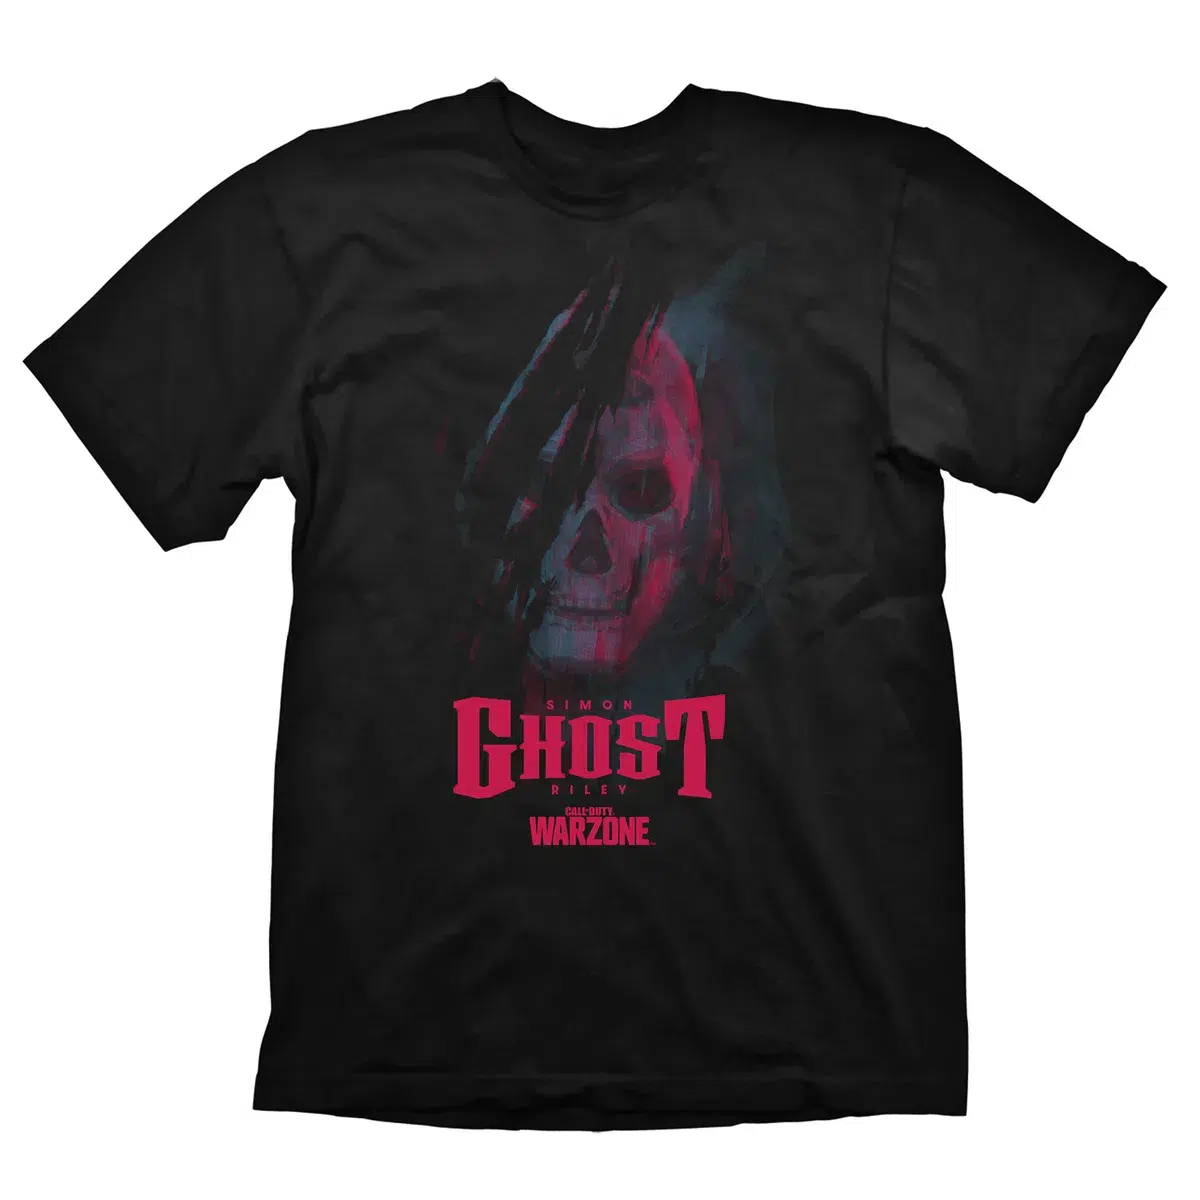 Call of Duty Warzone T-Shirt "Ghost" Black